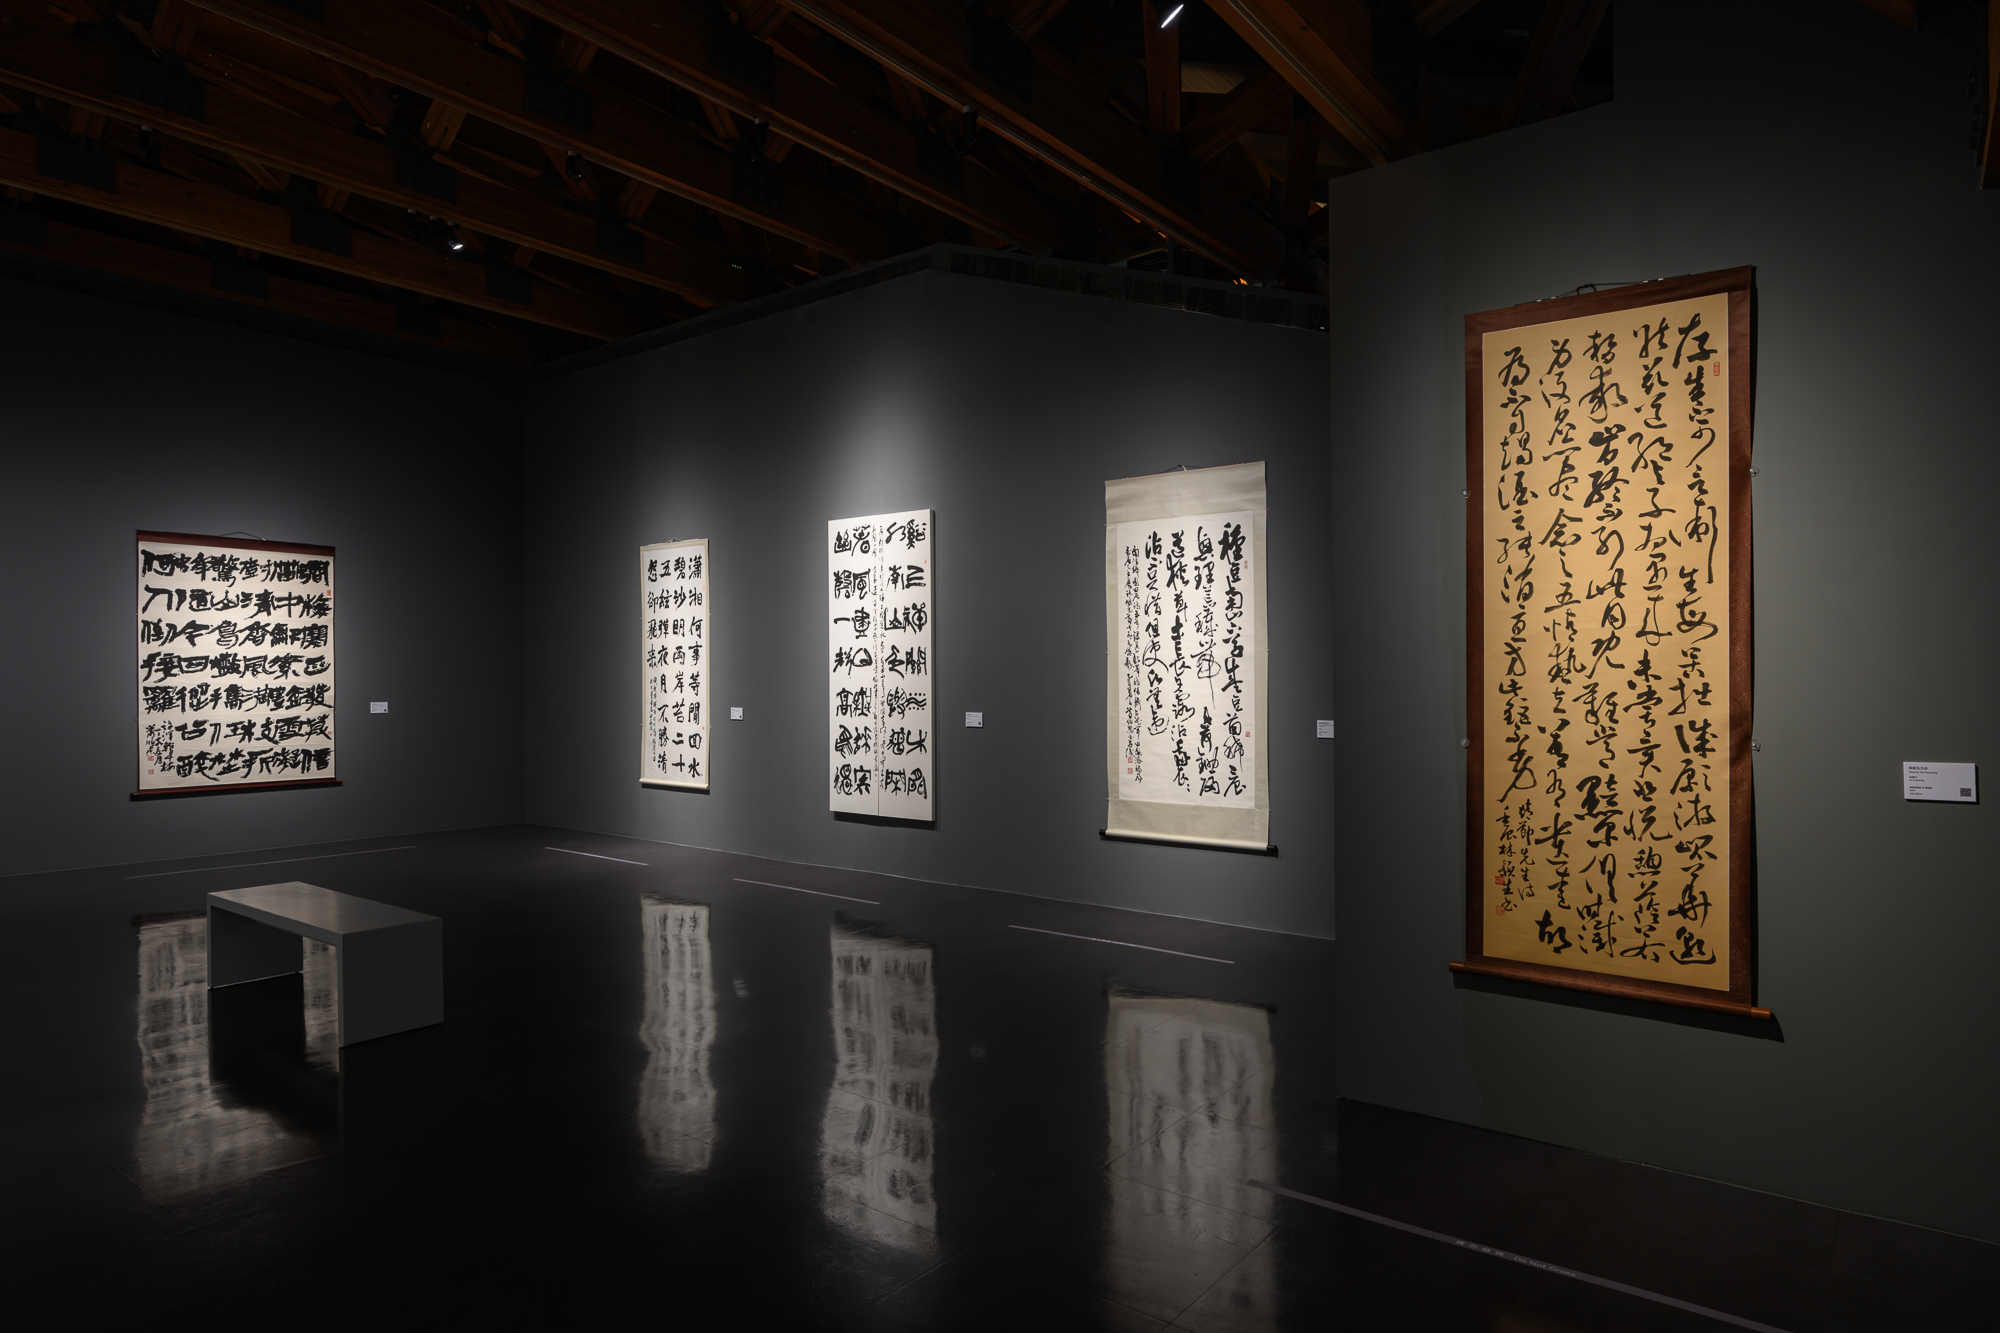 Calligraphing with the times: selection in calligraphy and seal-carving featuring the Taoyuan Fine Arts Exhibition champions